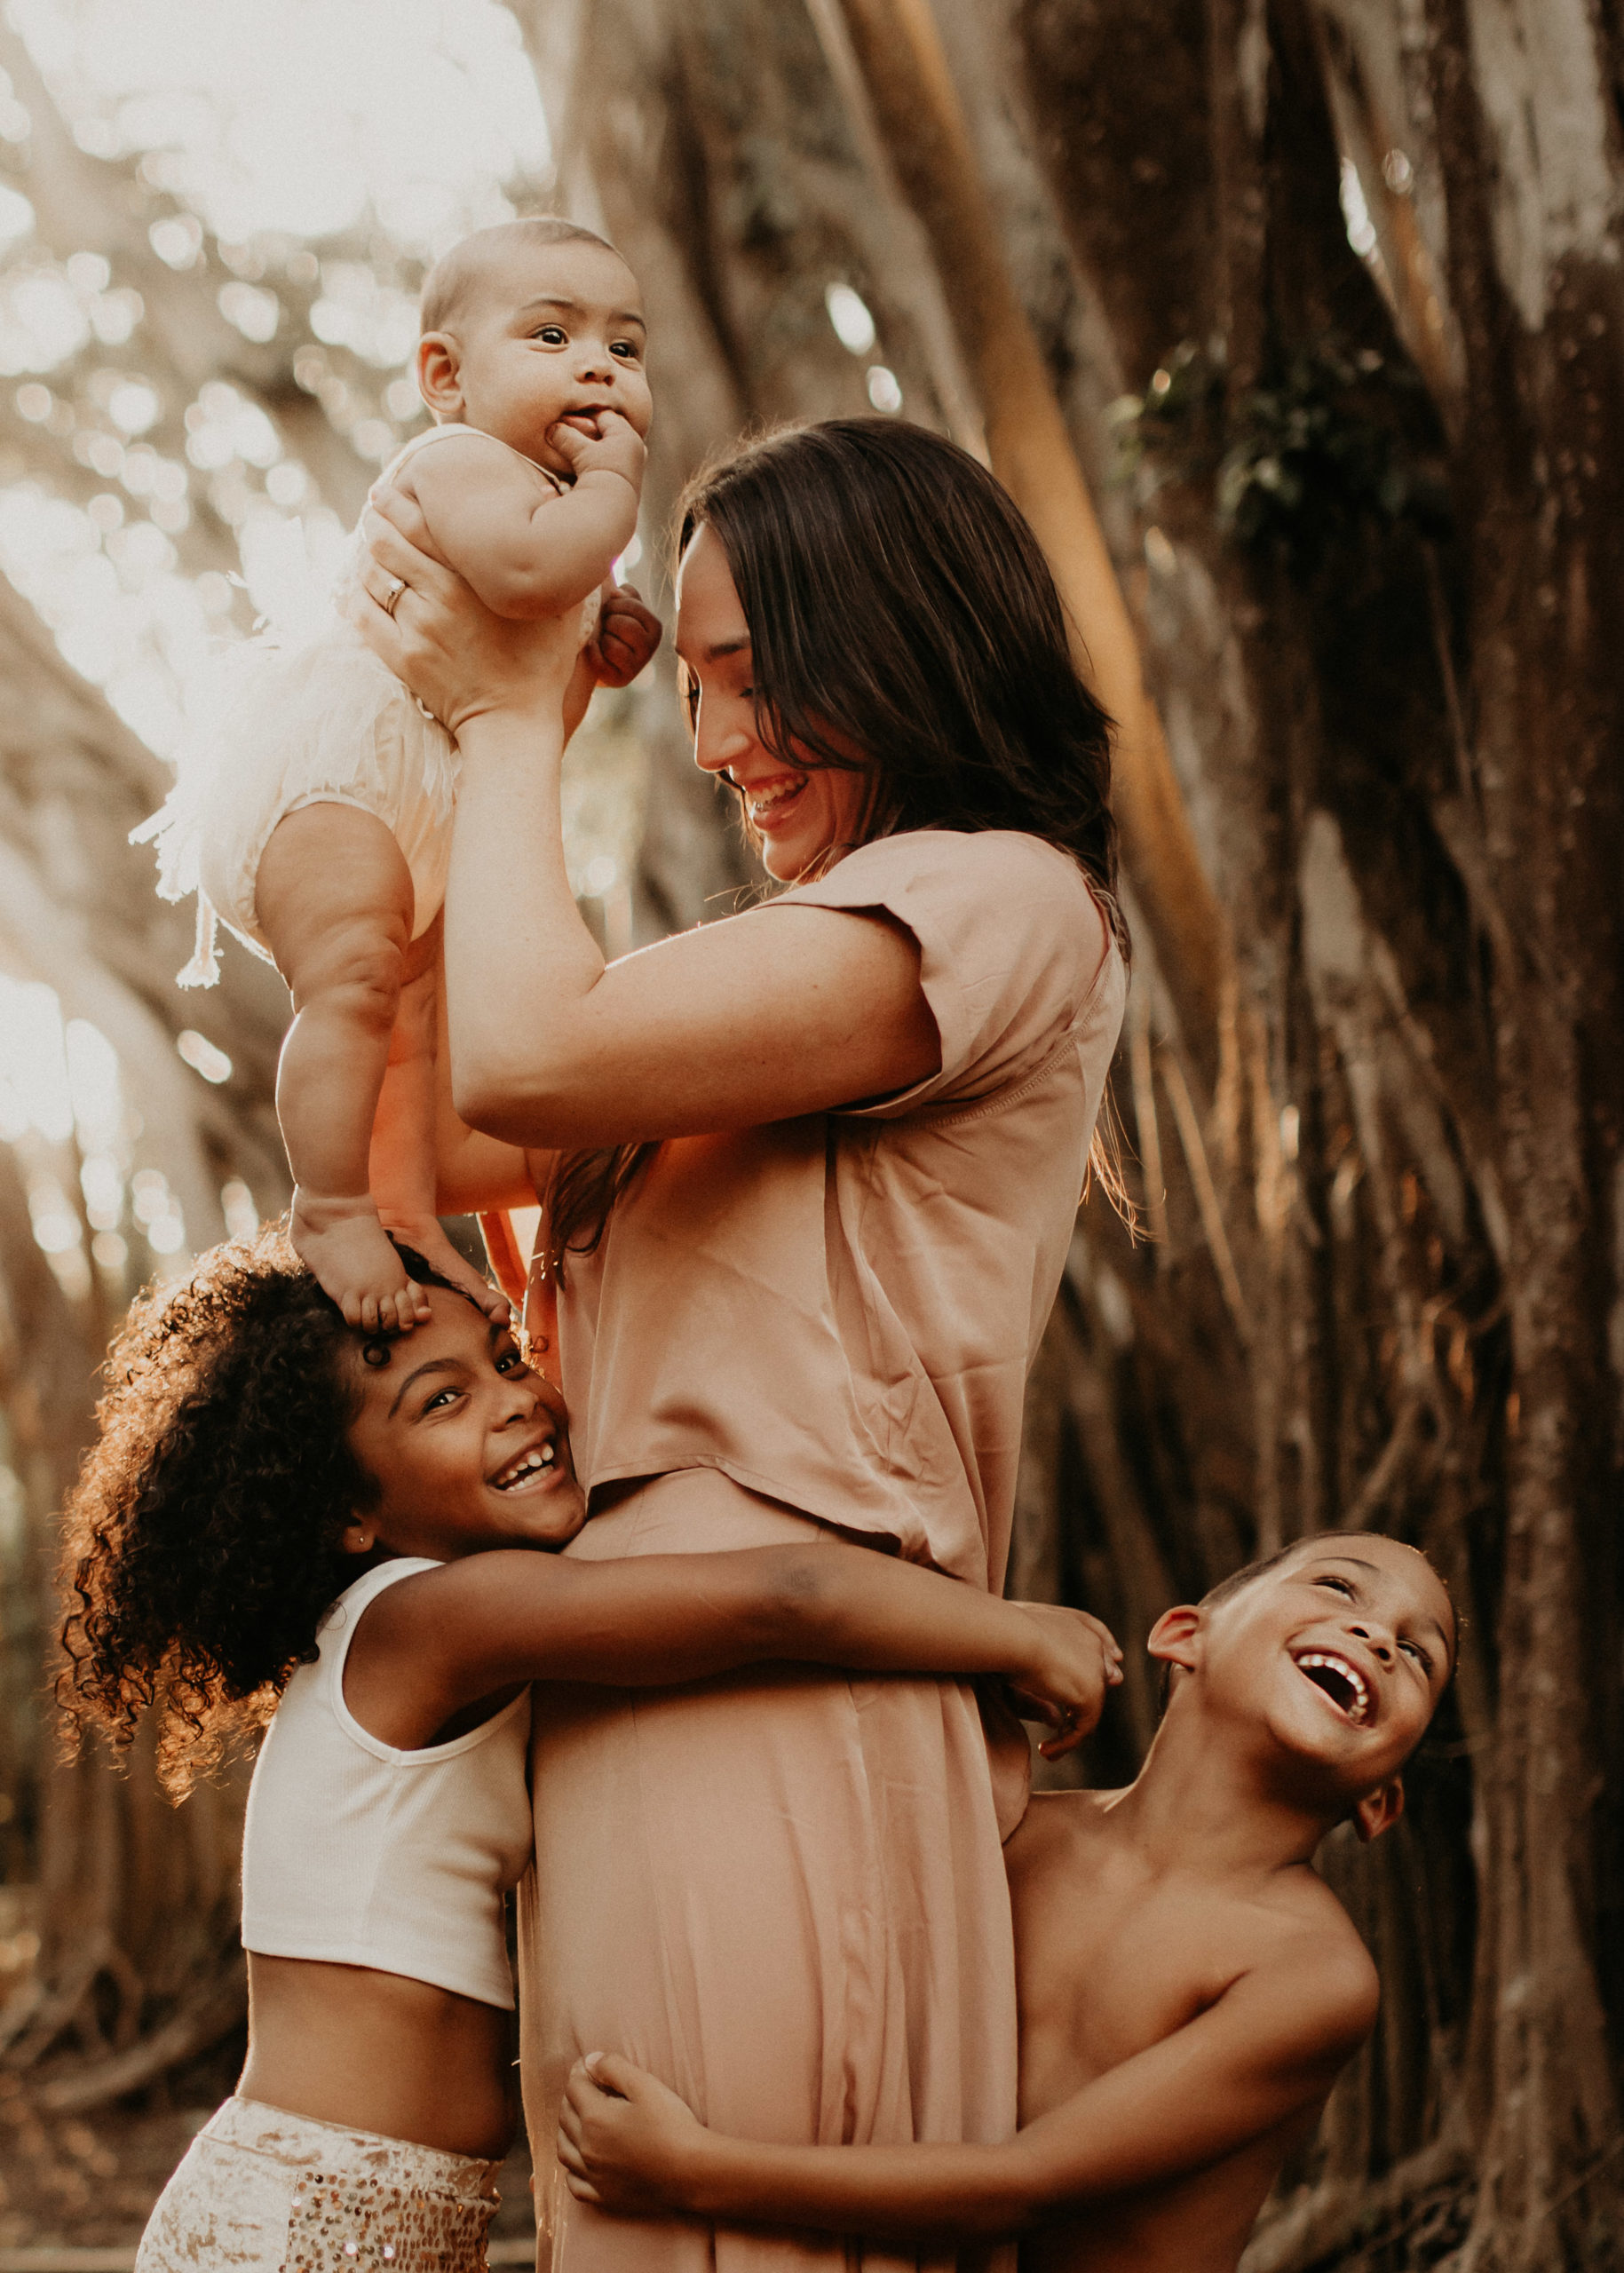 Mother with young children and baby playing in a banyan forest in Hawaii